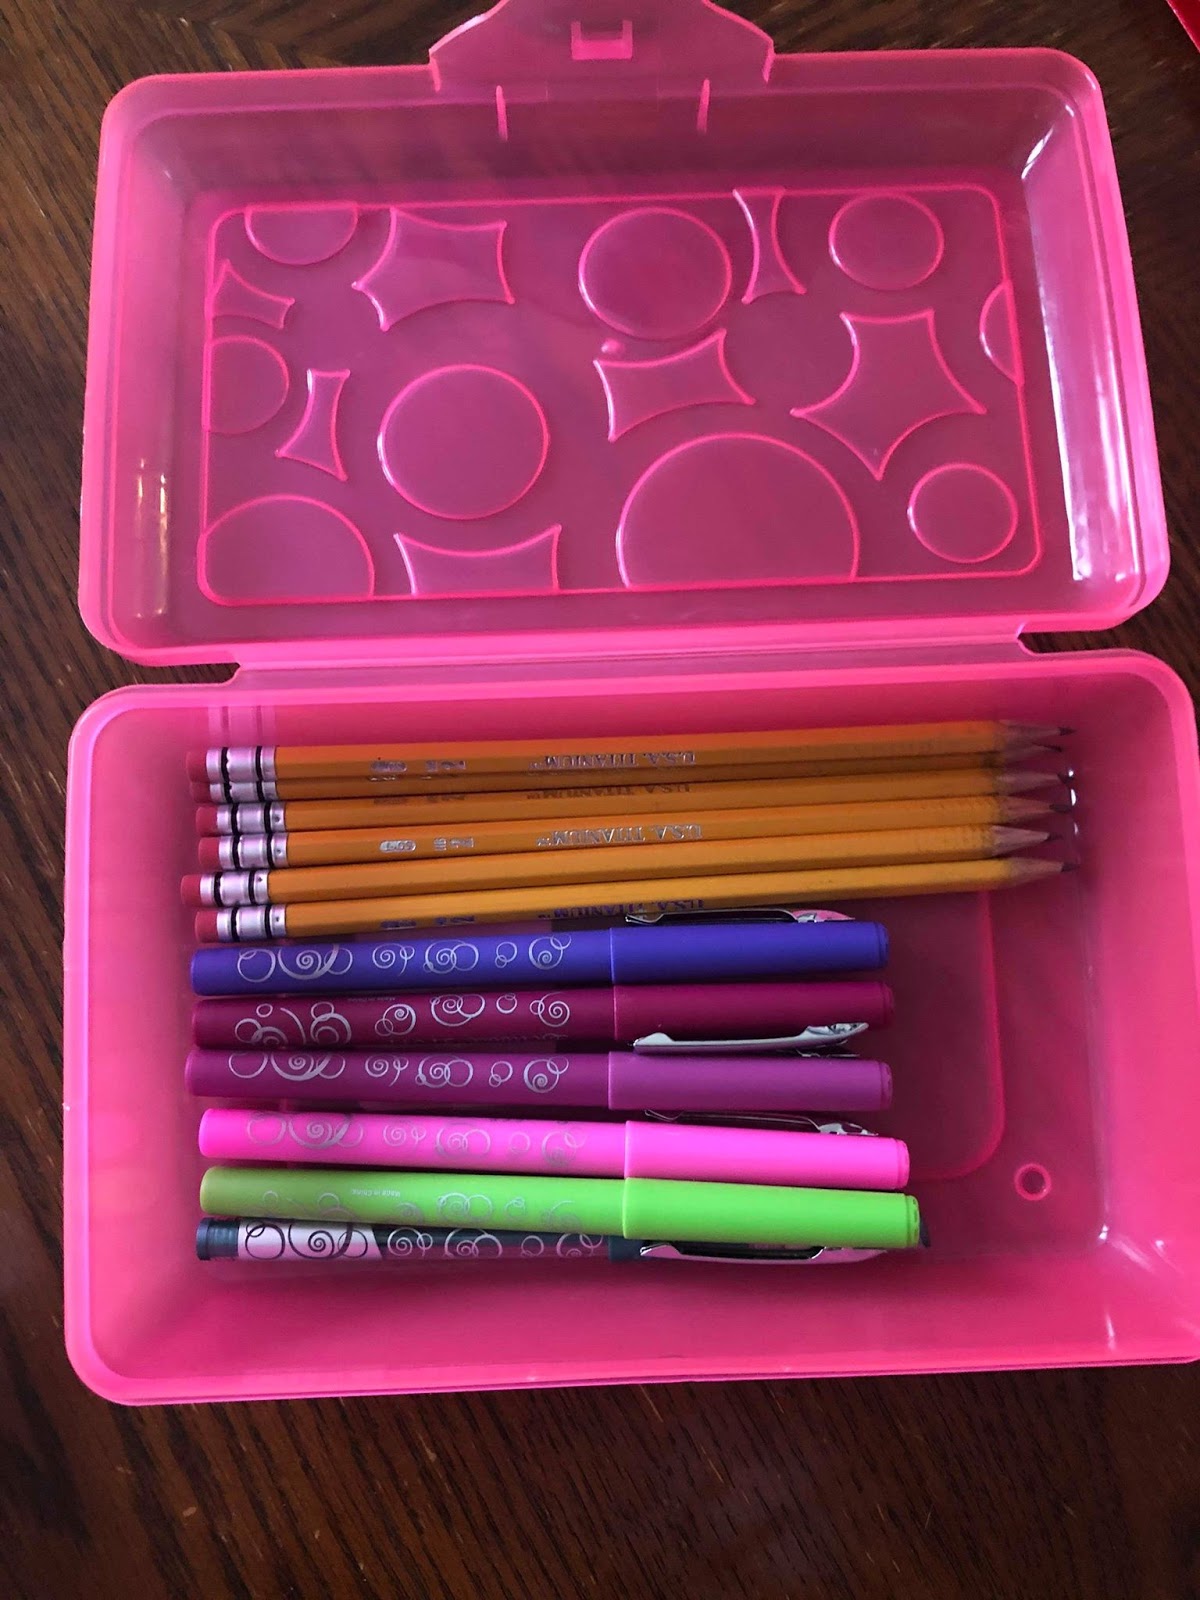 Scribble Stuff & USA Gold for Back to School Writing #Giveaway - Mommies  with Cents